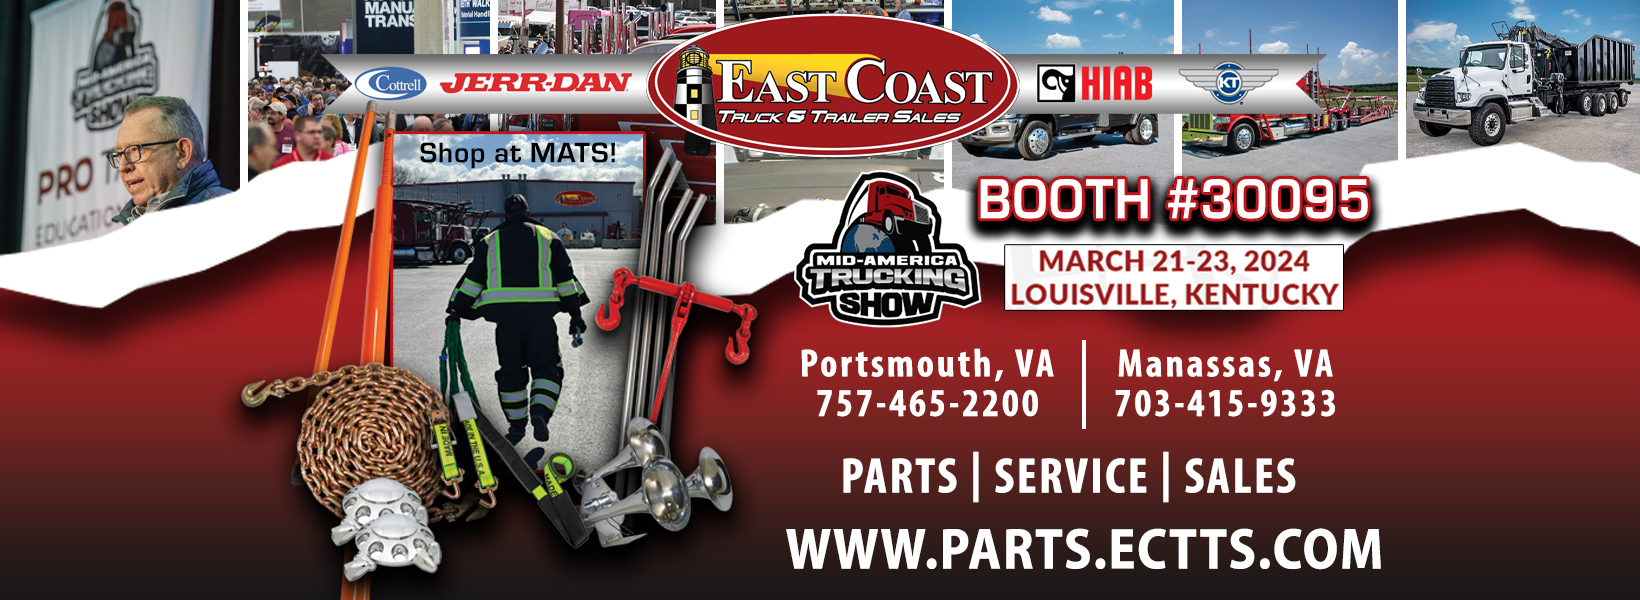 East Coast Truck and Trailer Sales Portsmouth VA Mid America Trucking Show Banner